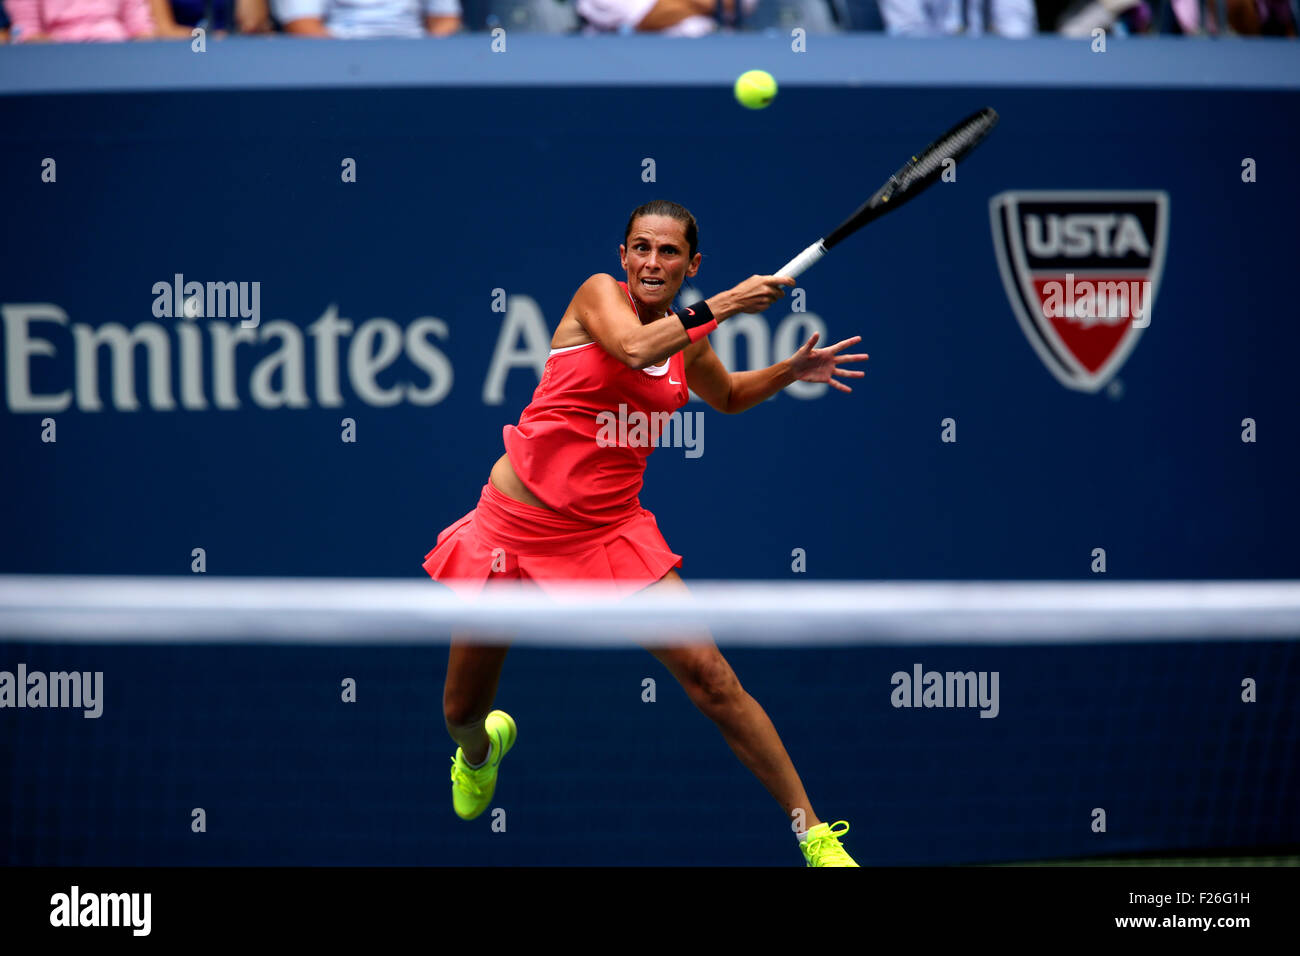 New York, USA. 12th Sep, 2015. Roberta Vinci of Italy returns a shot to countrywoman Flavia Penetta during the women's final of the U.S. Open at Flushing Meadows, New York on the afternoon of September 12th, 2015.  Pennetta won the match 7-6 (7-4), 6-2 Credit:  Adam Stoltman/Alamy Live News Stock Photo